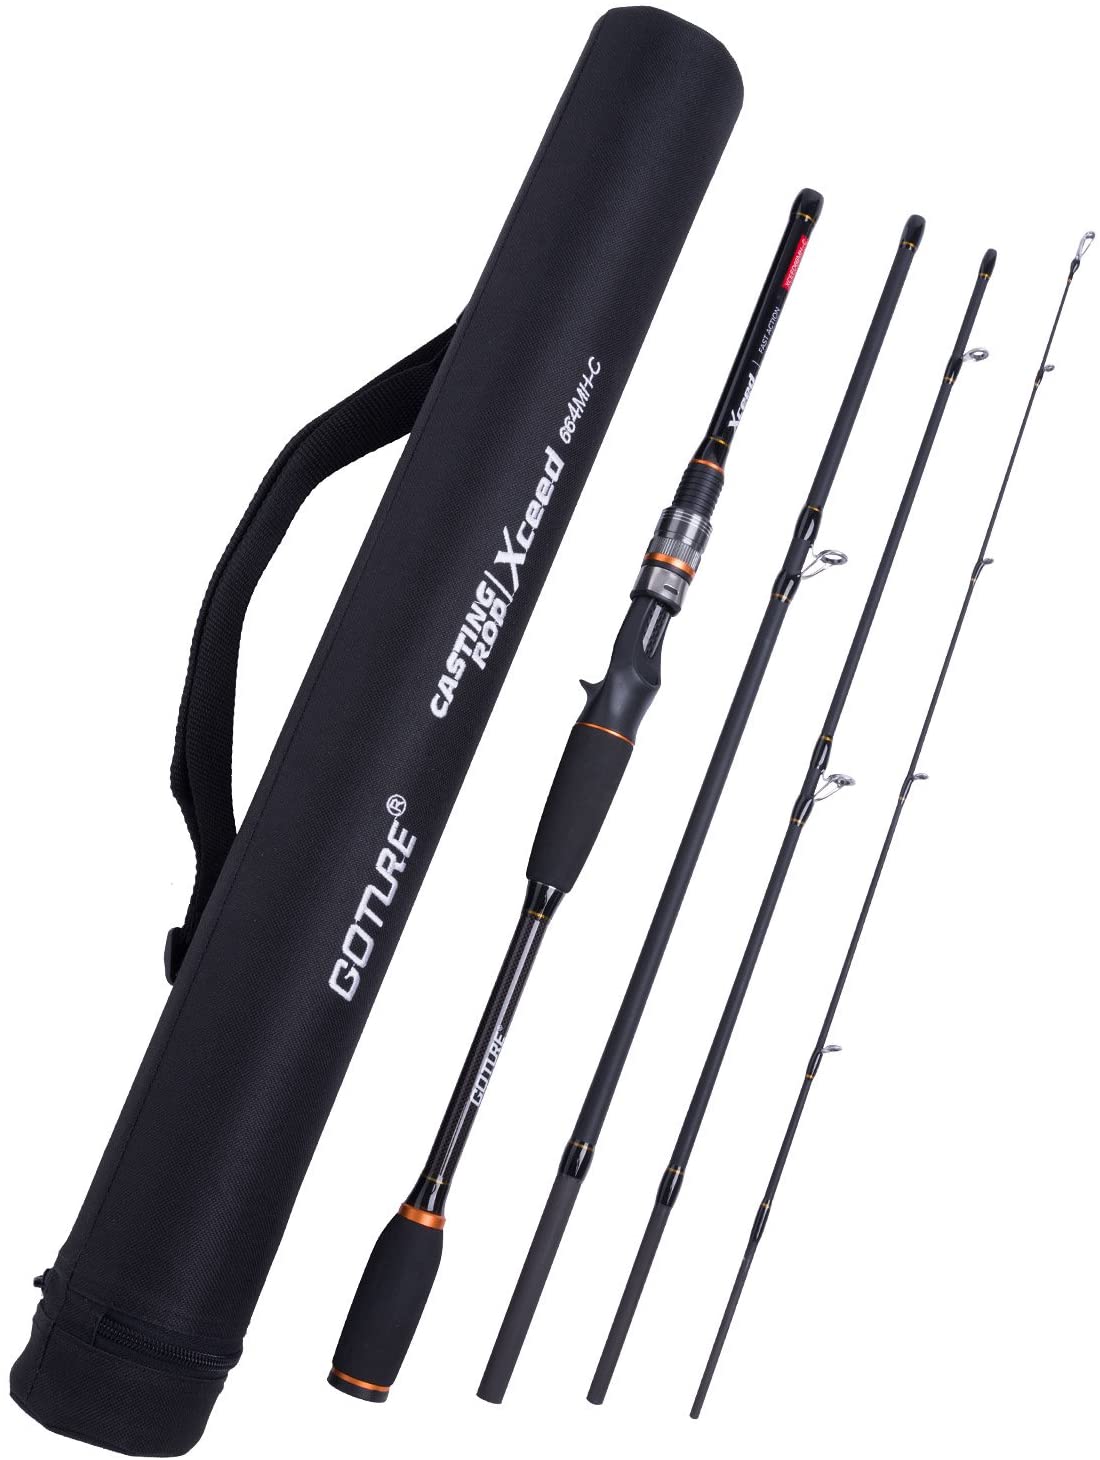 Goture Xceed Fishing Rod, Travel Fishing Rods 4Pcs and 4 PCS  Spinning/Casting Rod - 6.6FT-Casting